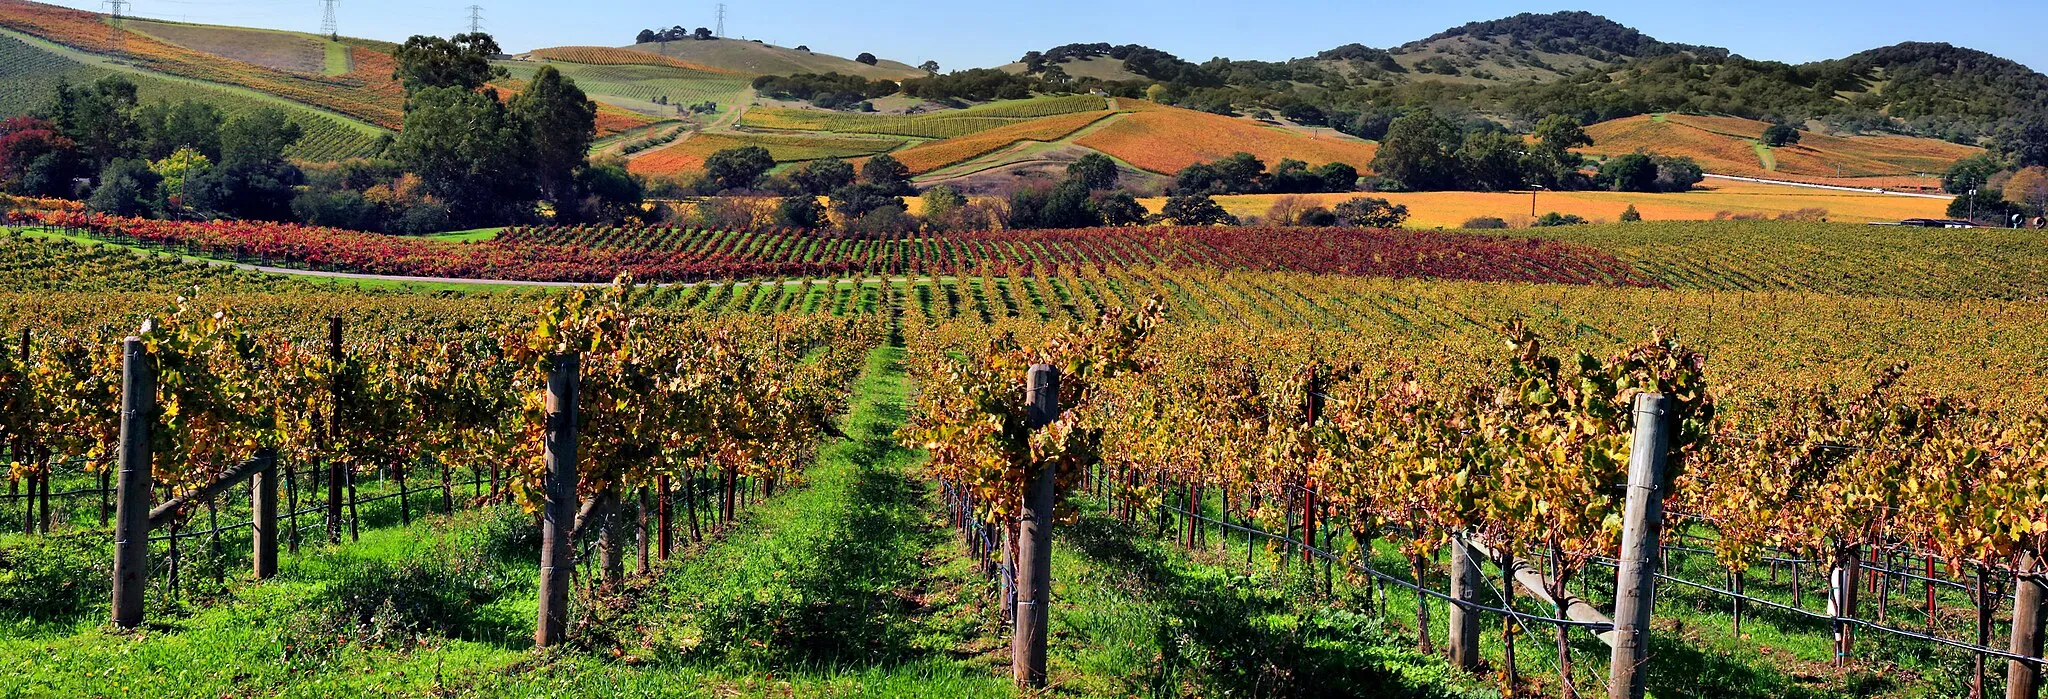 Photo showing: Vineyards in Napa Valley